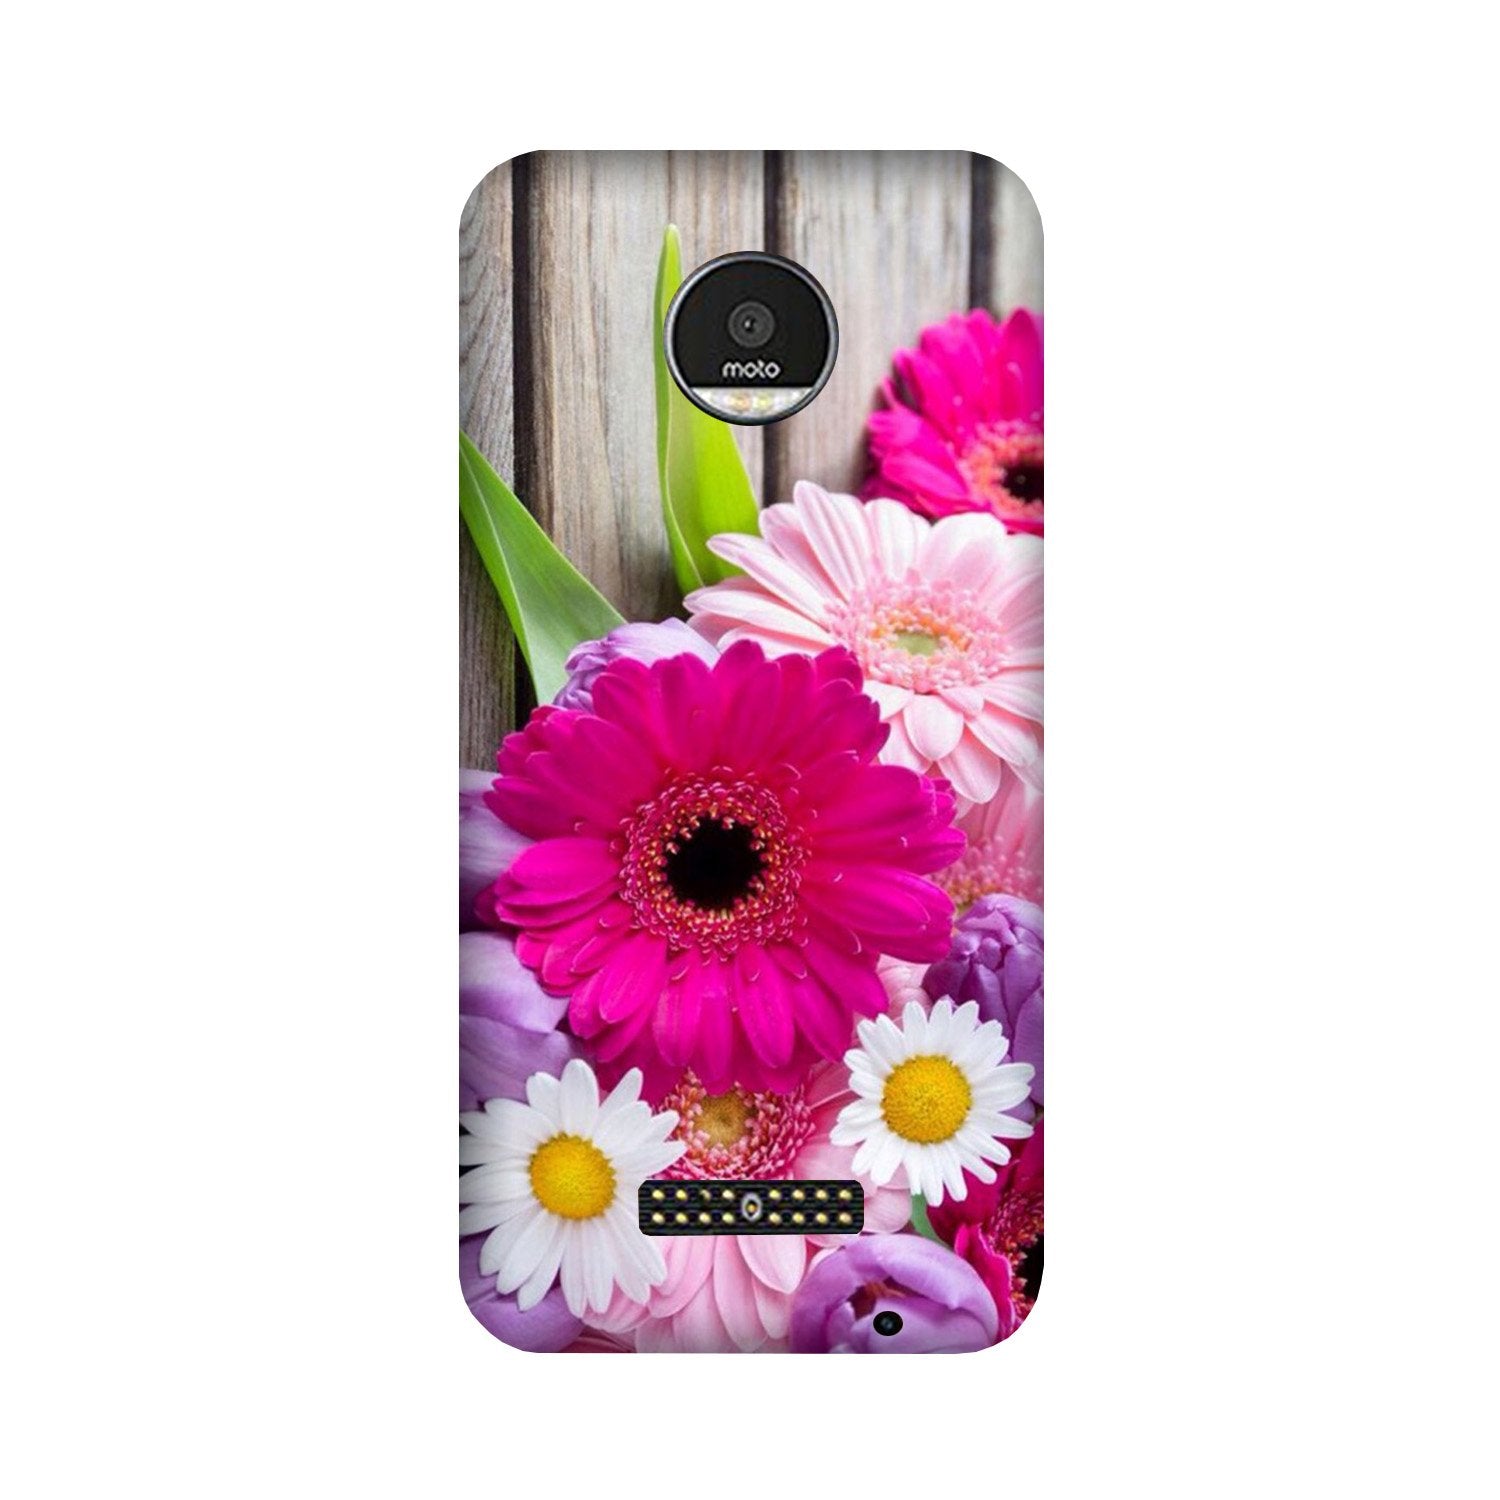 Coloful Daisy2 Case for Moto Z2 Play